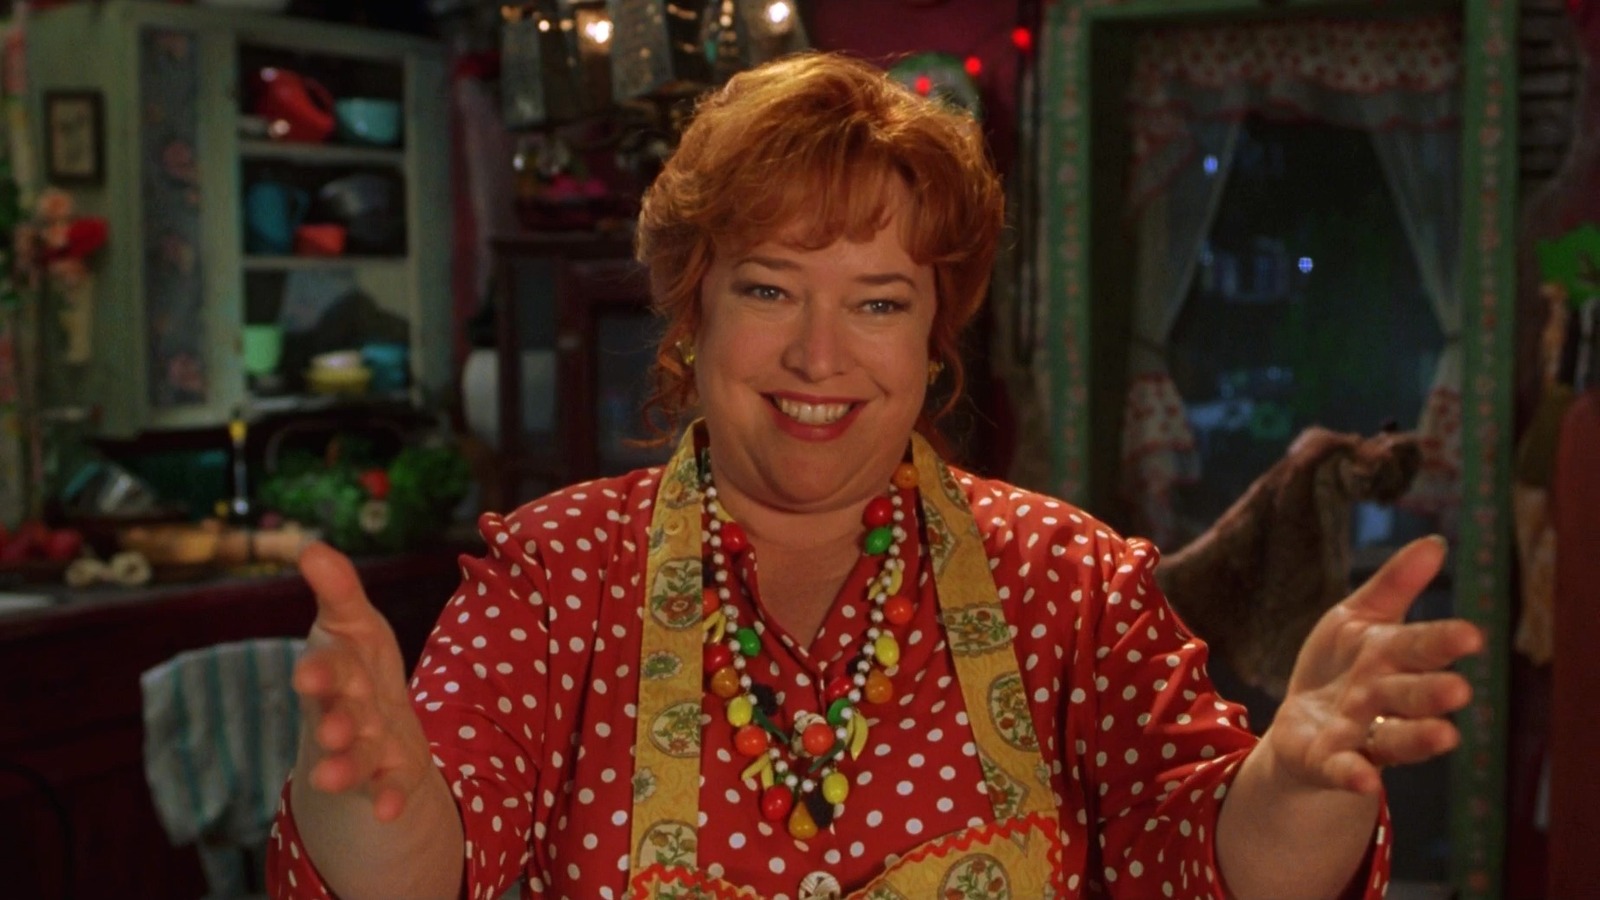 https://www.slashfilm.com/img/gallery/kathy-bates-joining-the-waterboy-took-some-convincing-from-her-niece-not-the-devil/l-intro-1670249042.jpg